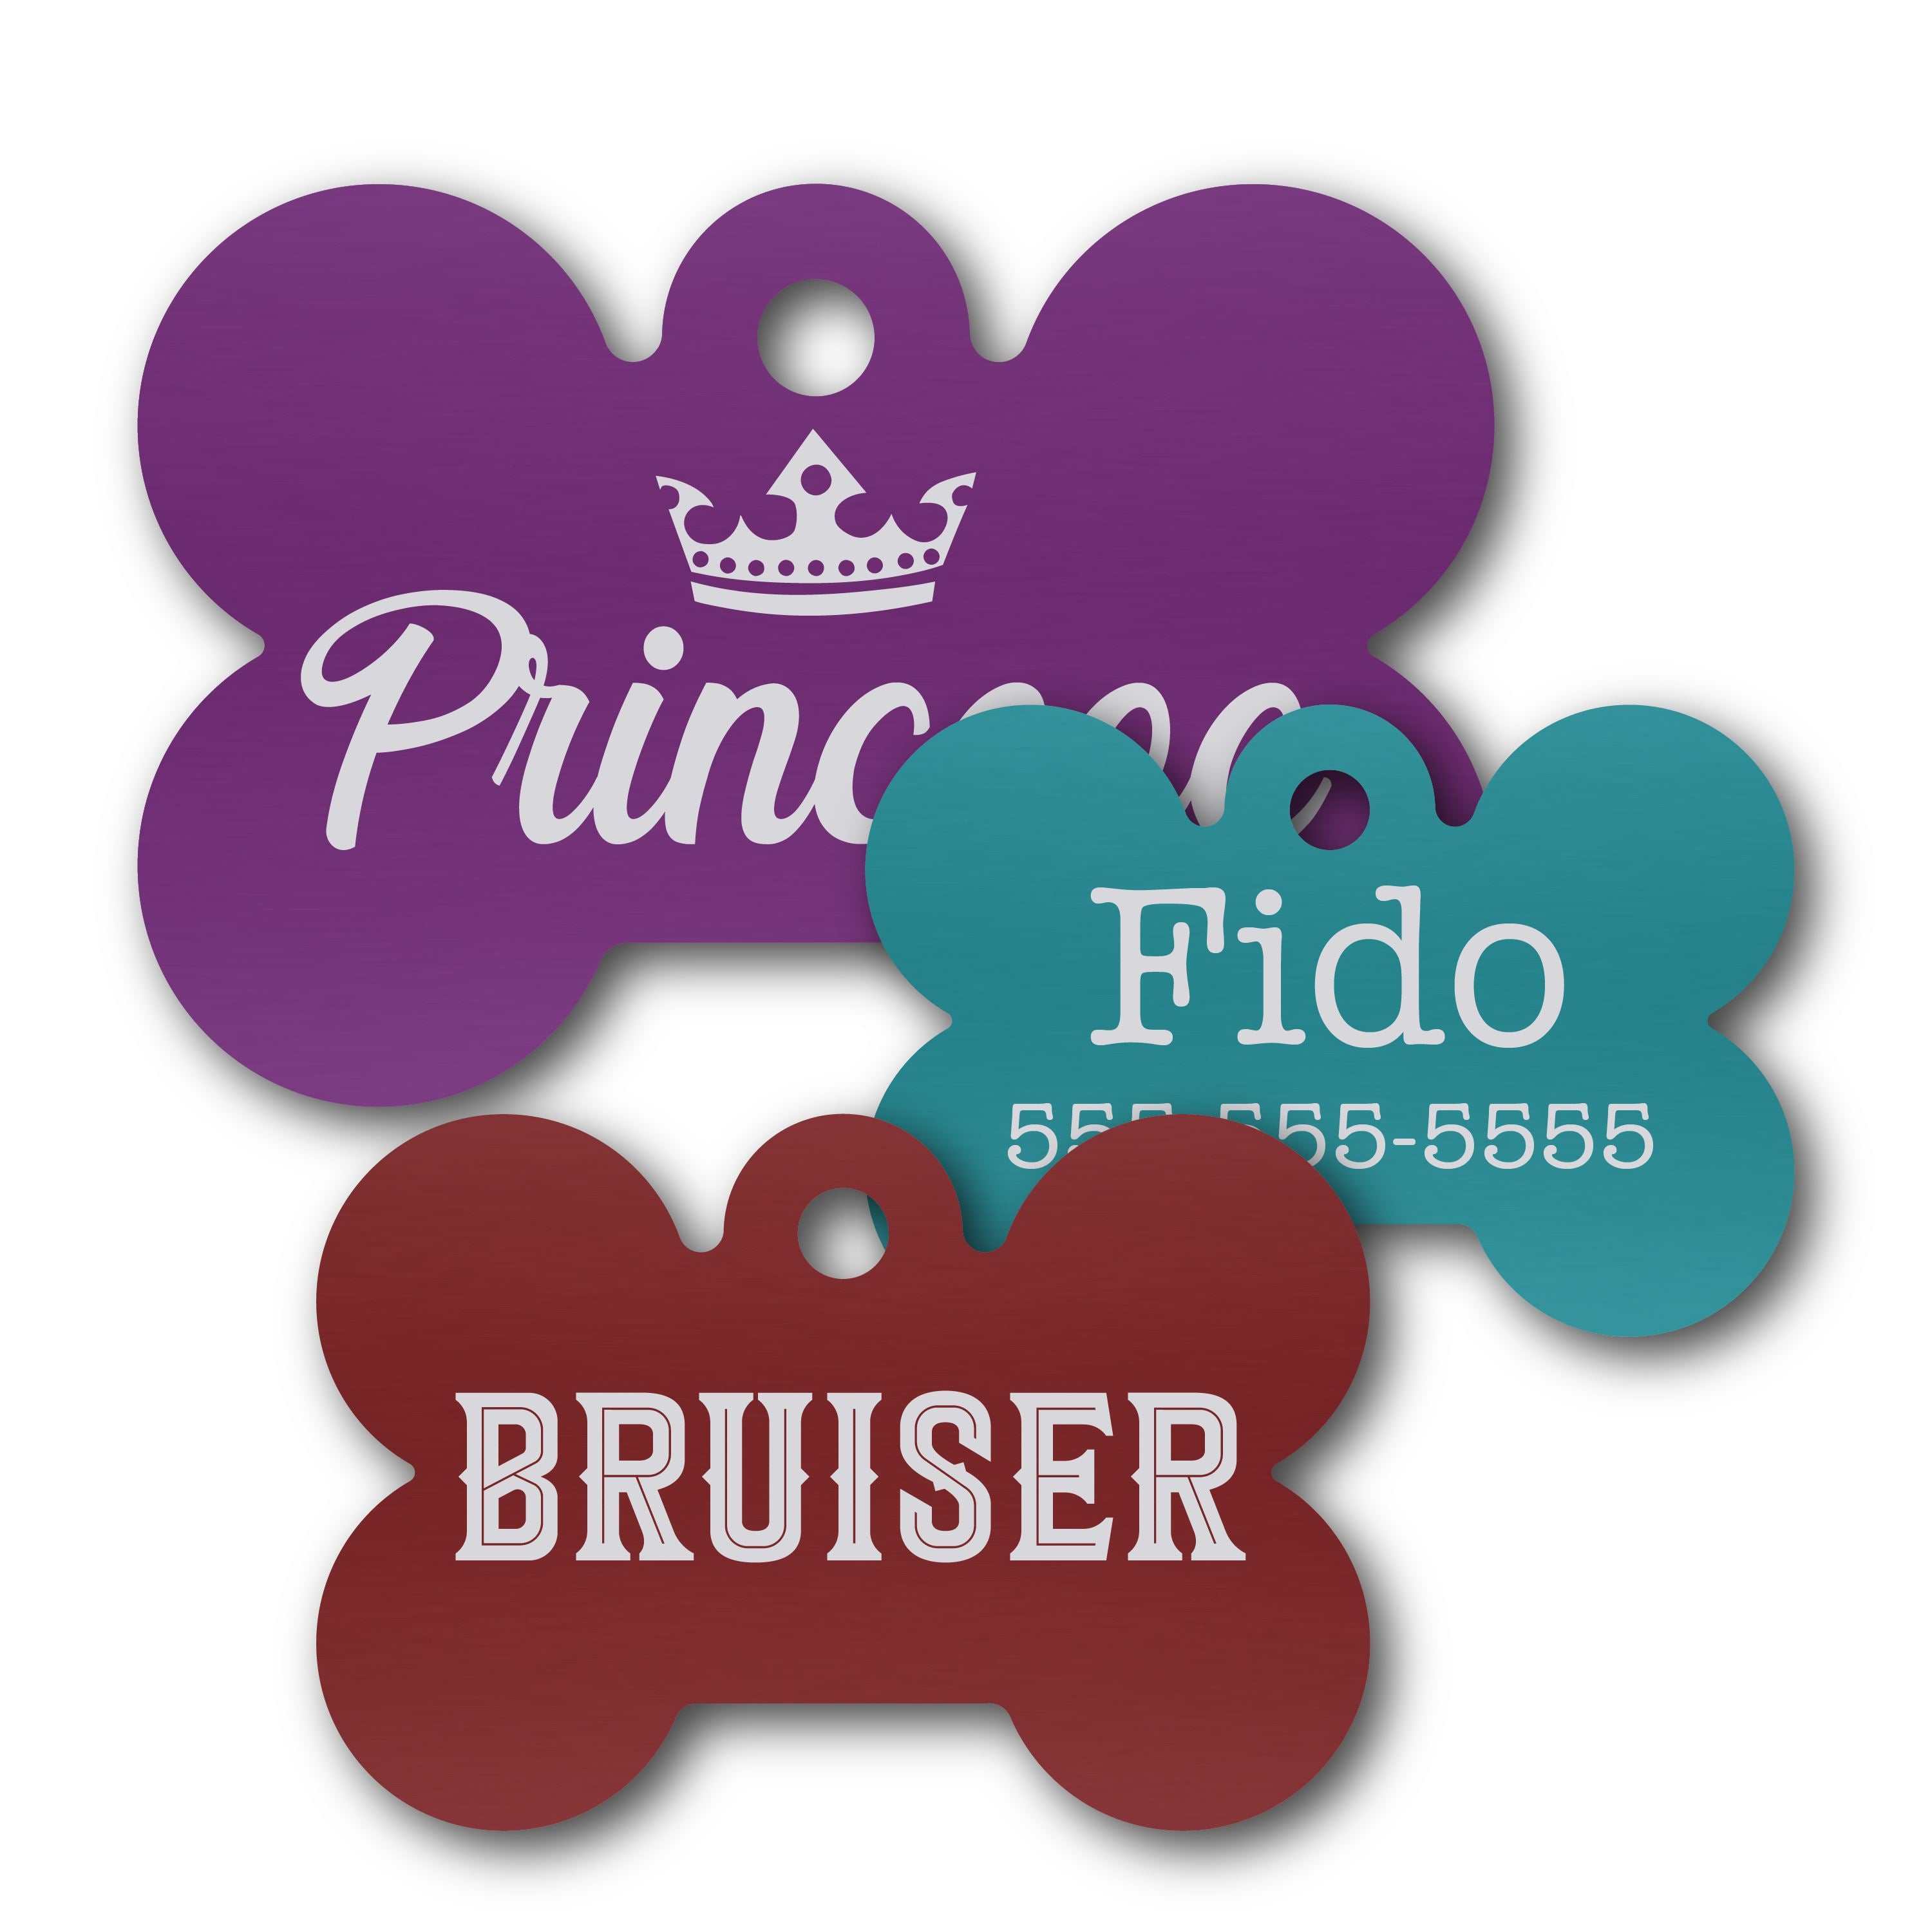 Anodized Aluminum Dog Bone Shaped Tags, 3/4" x 1-1/16" with 3/32" Hole, Laser Engraved Metal Tags Craftworks NW 